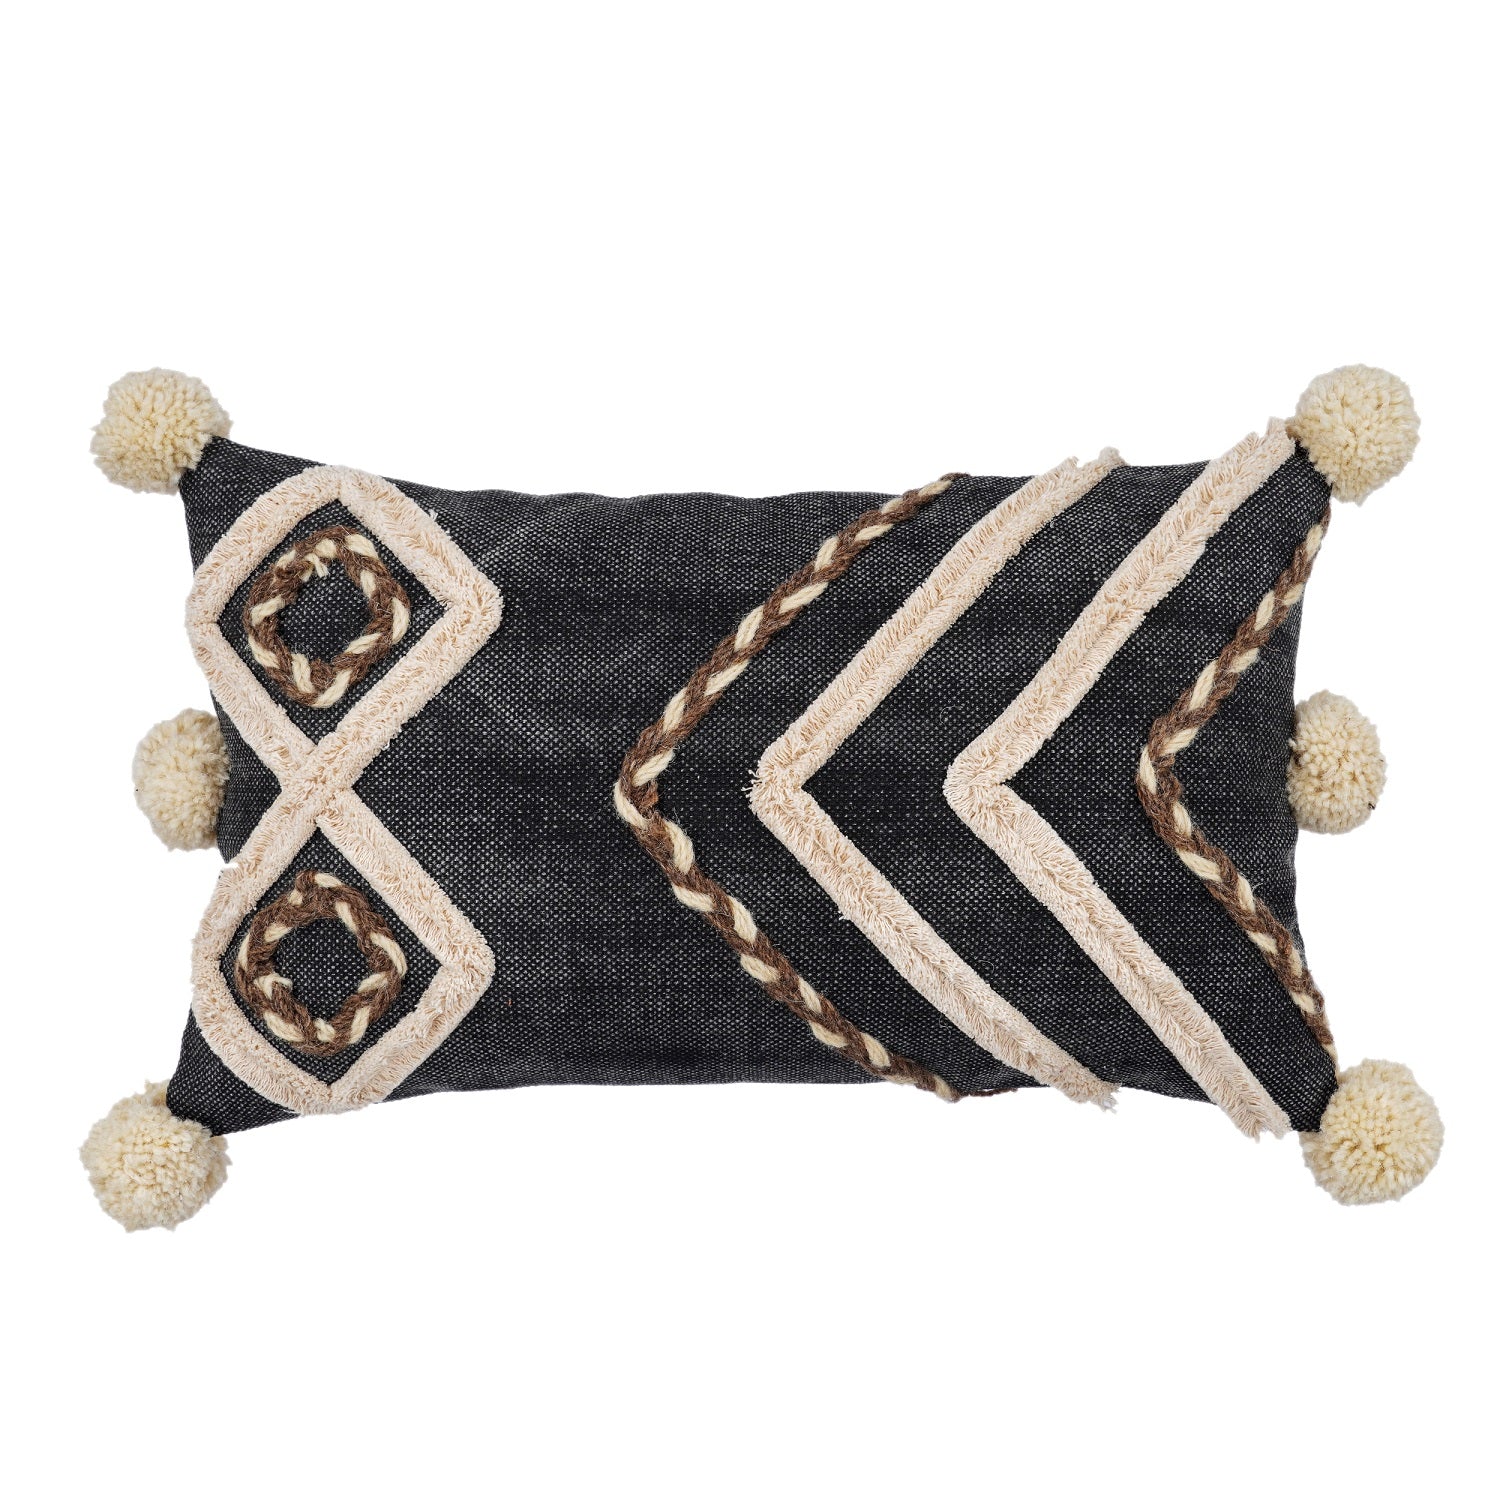 'Wanderlust Whimsy' Hand-Woven Cotton Wool Cushion Cover